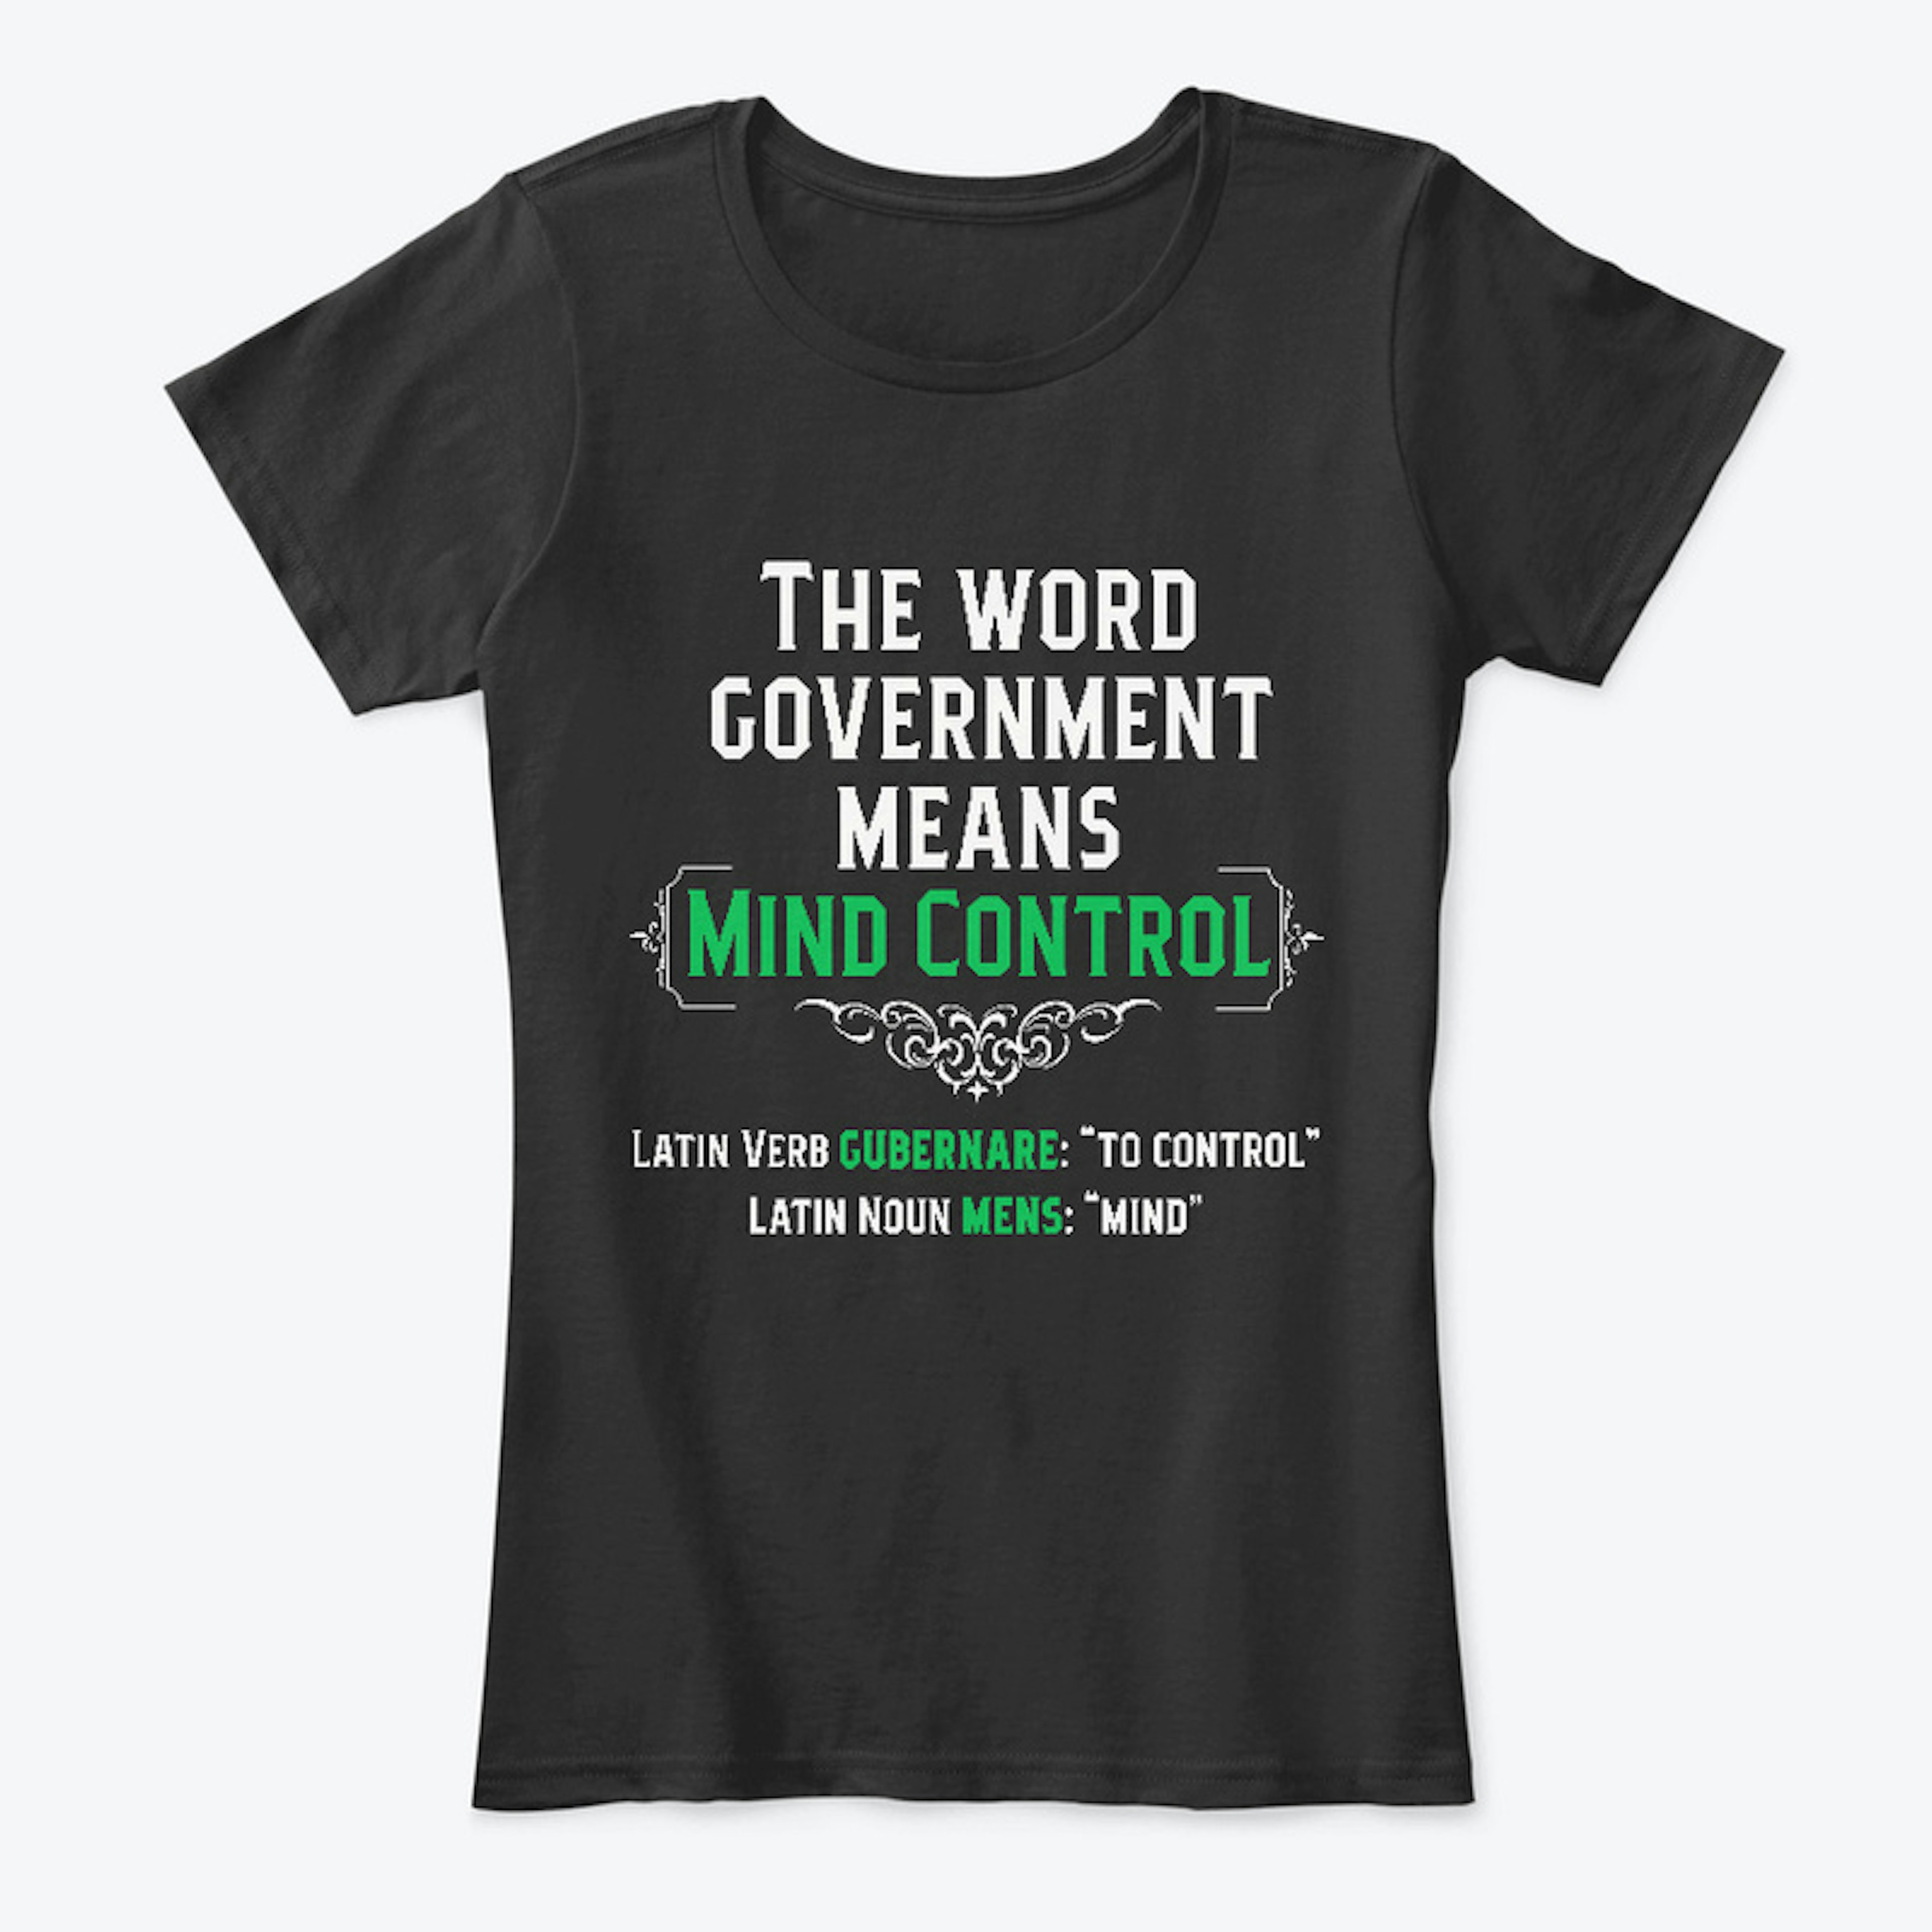 The Word Government (Black)